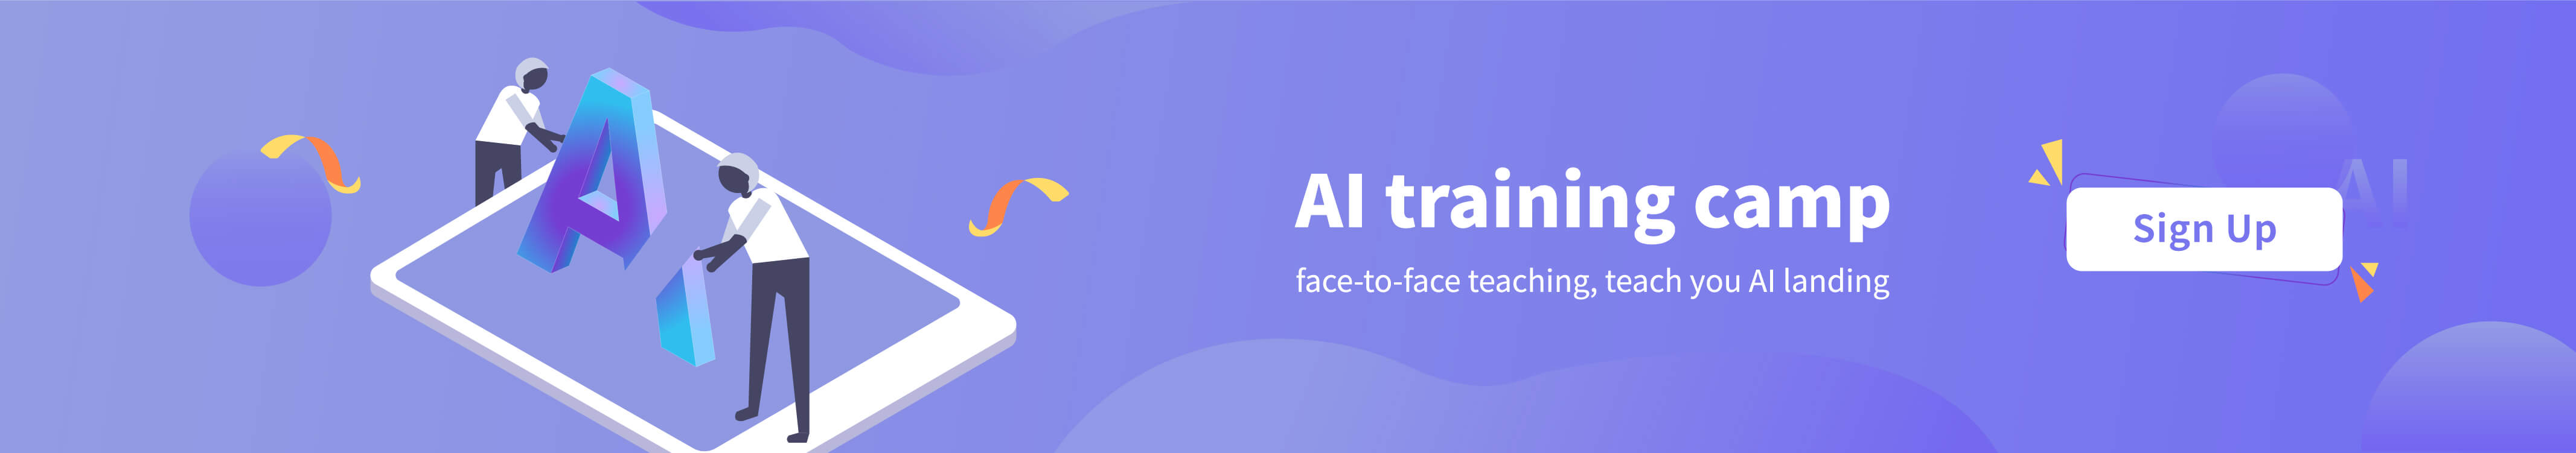 Registration for Aqrose Technology AI training